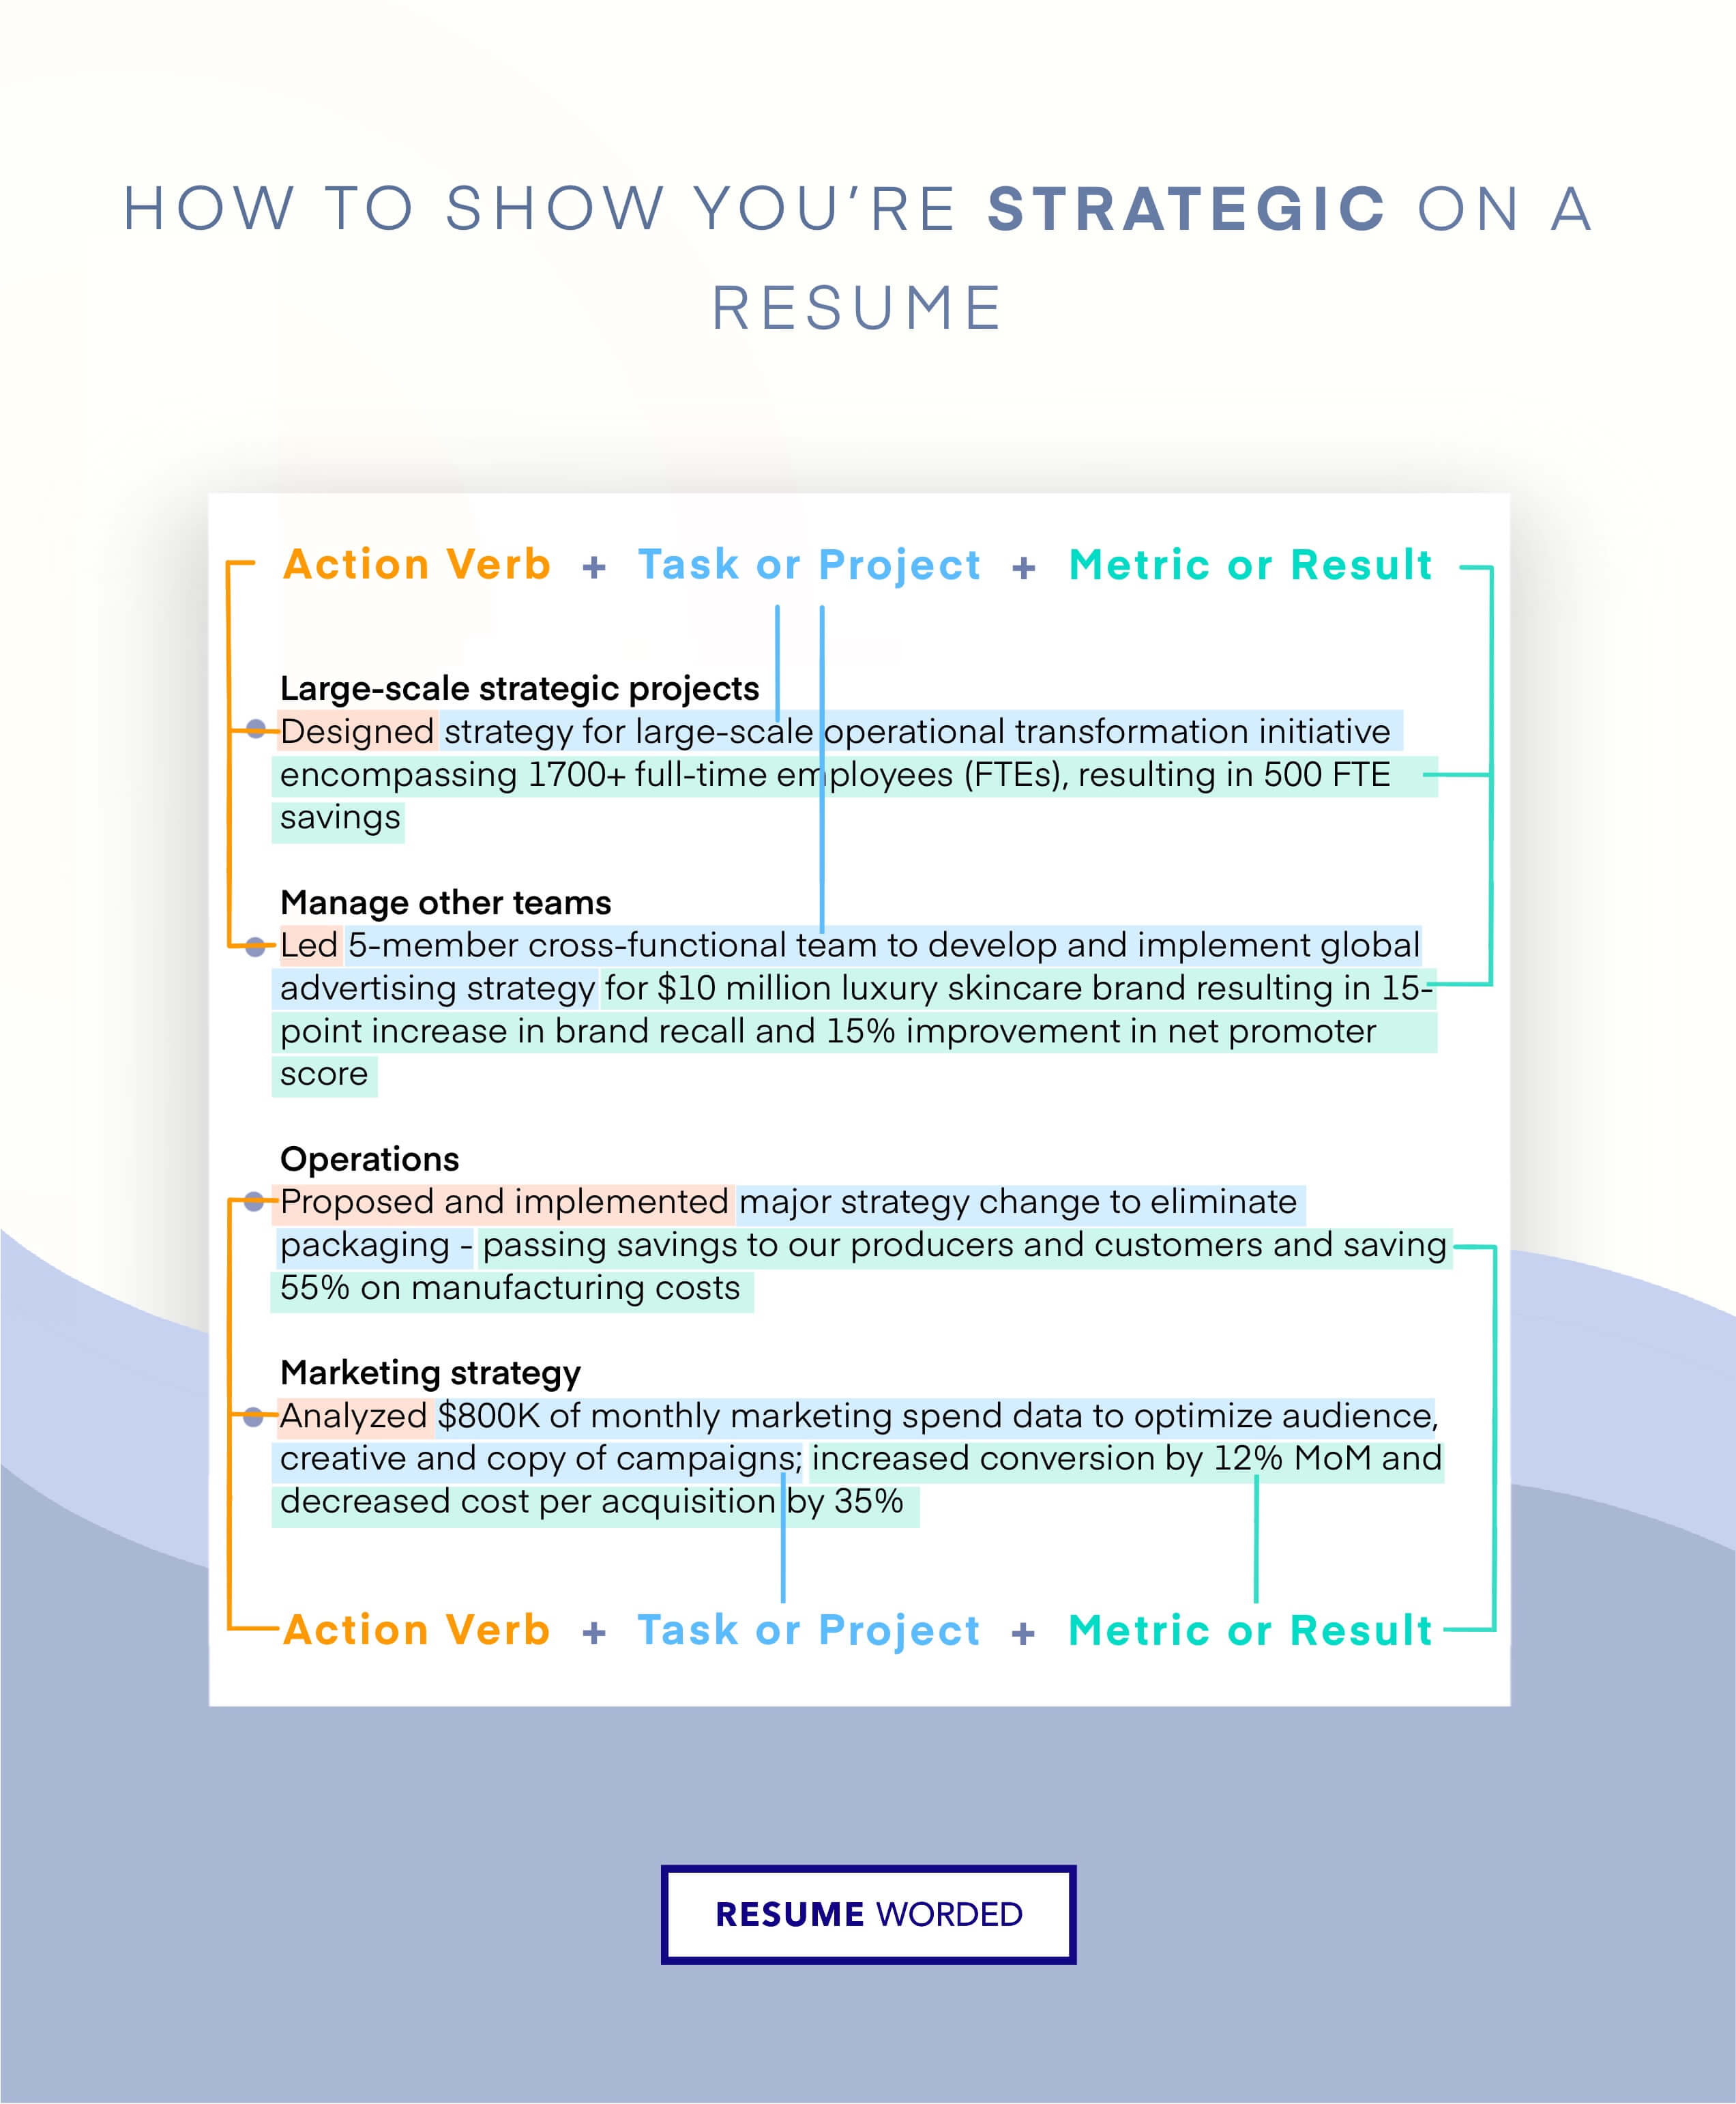 Showcase leadership and strategy - Director of Recruiting CV